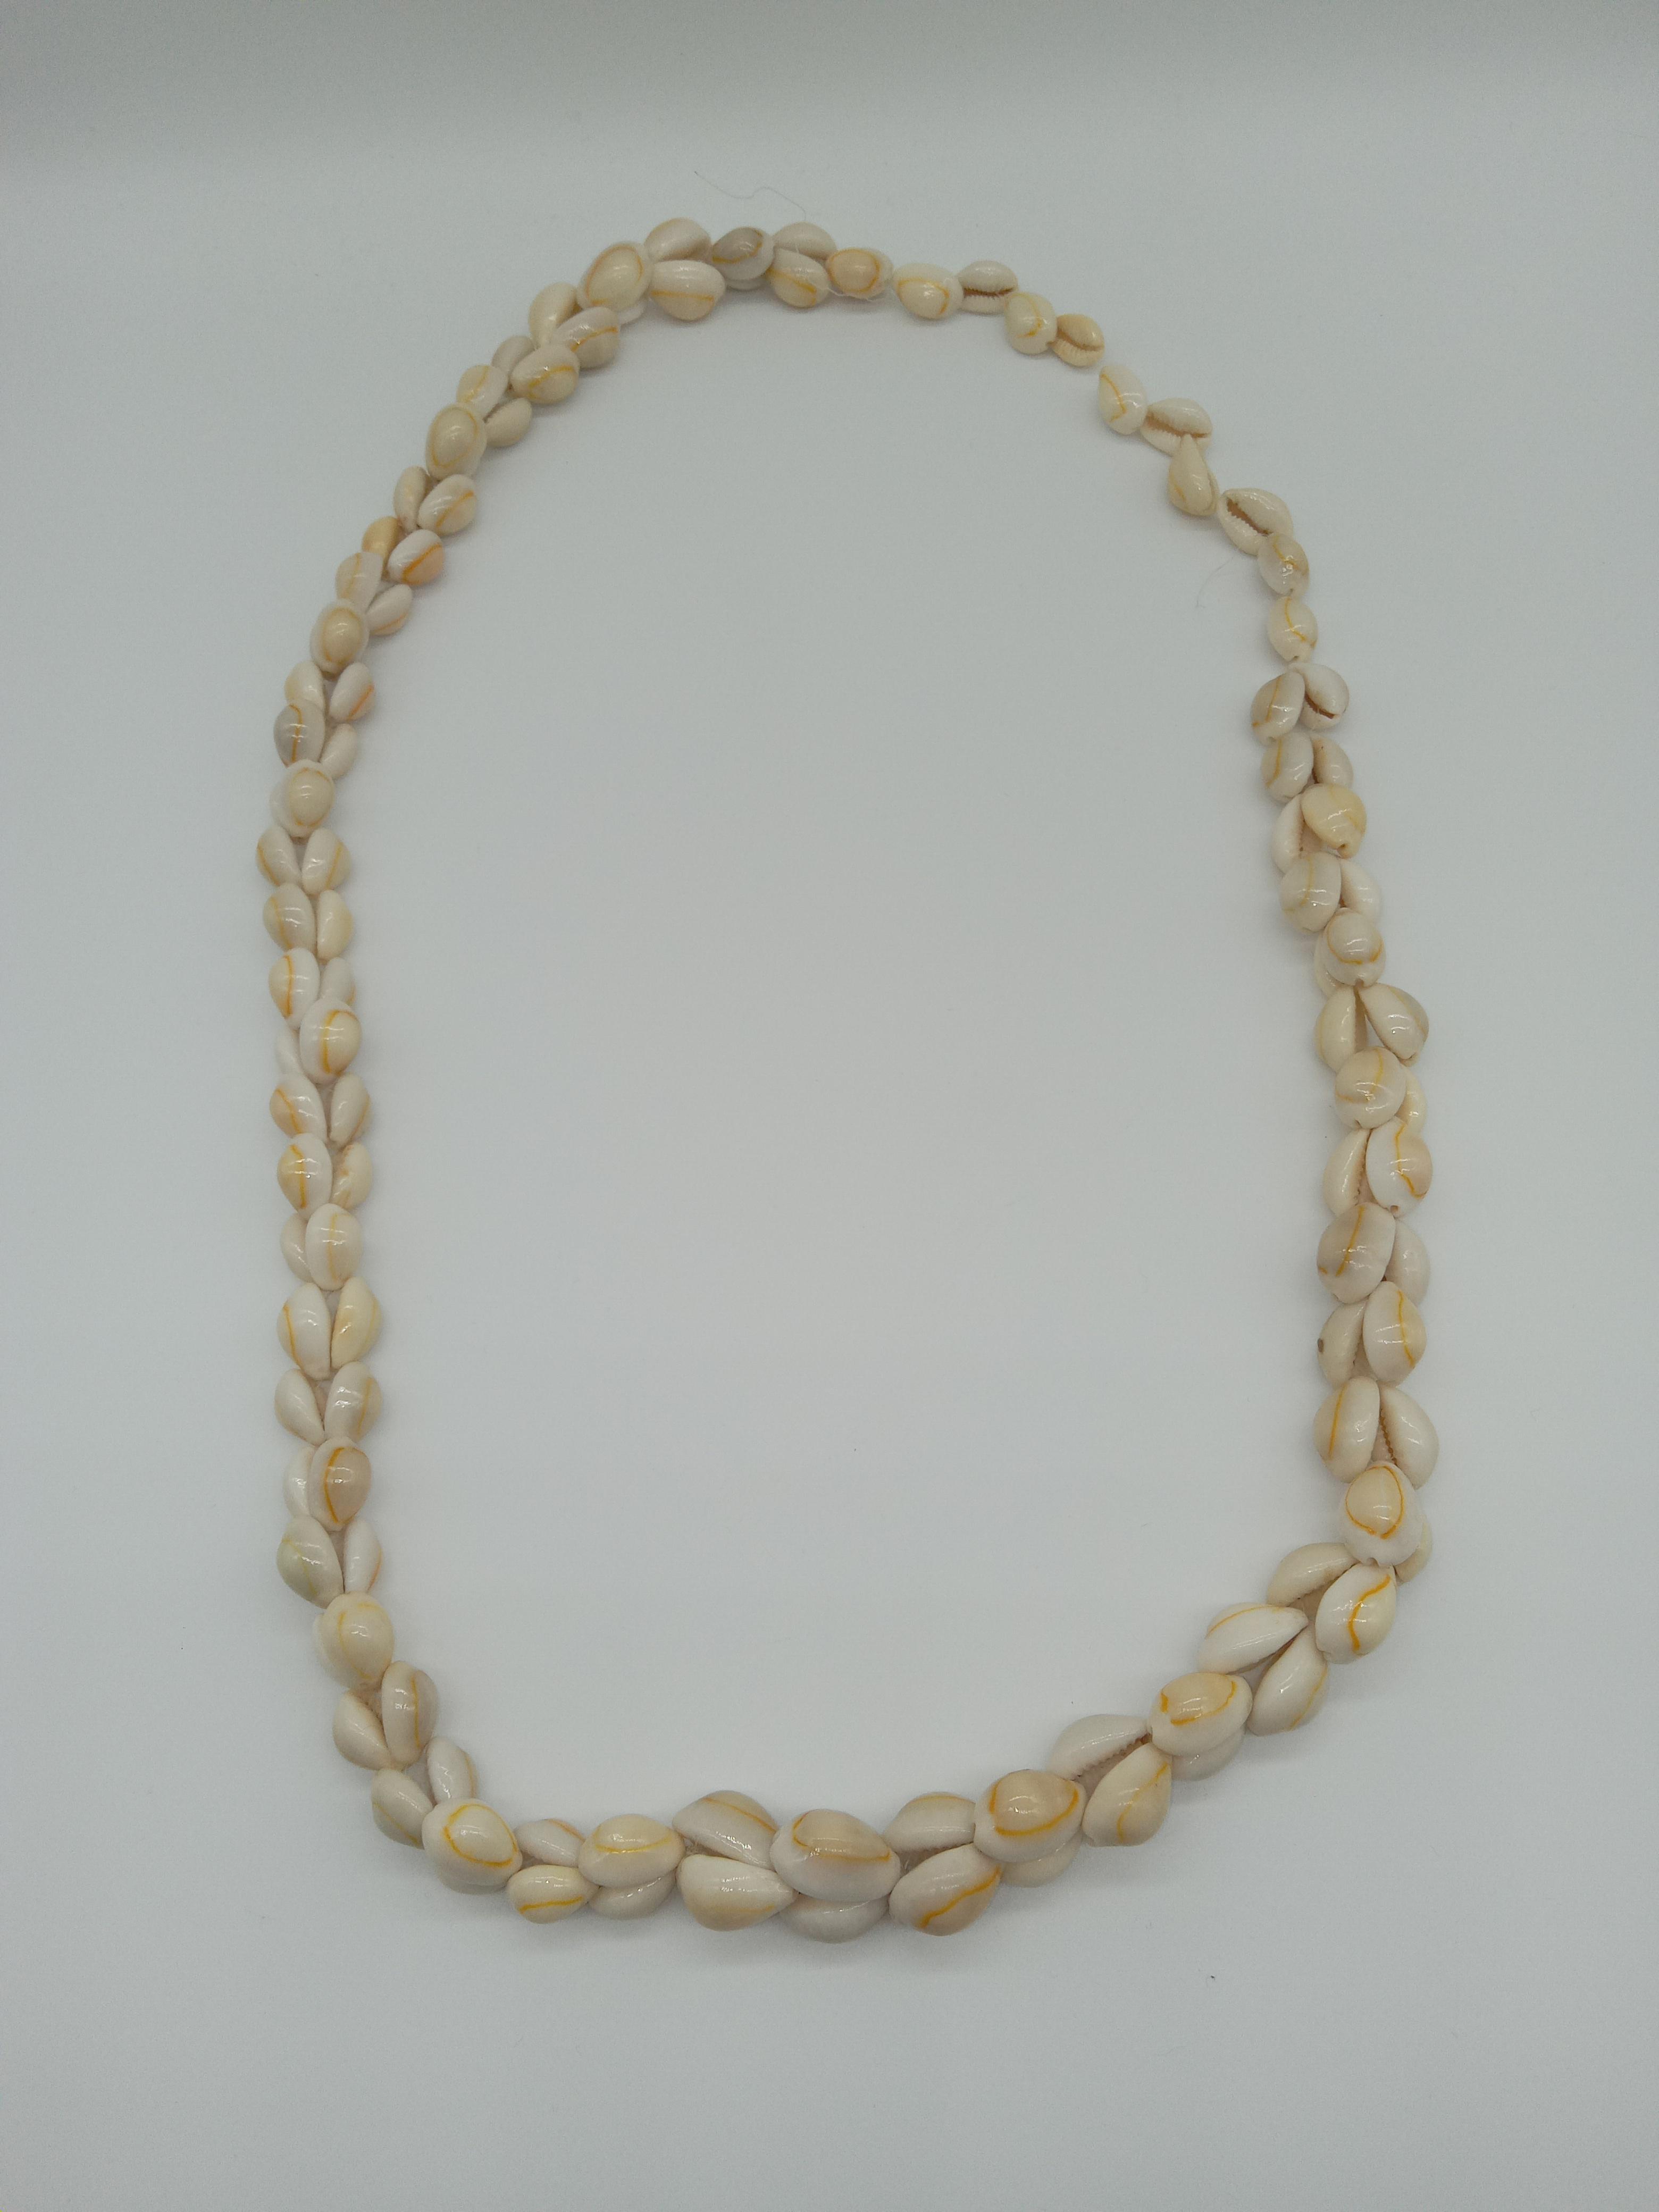 2 Strands of Vintage Puka Shell Necklaces